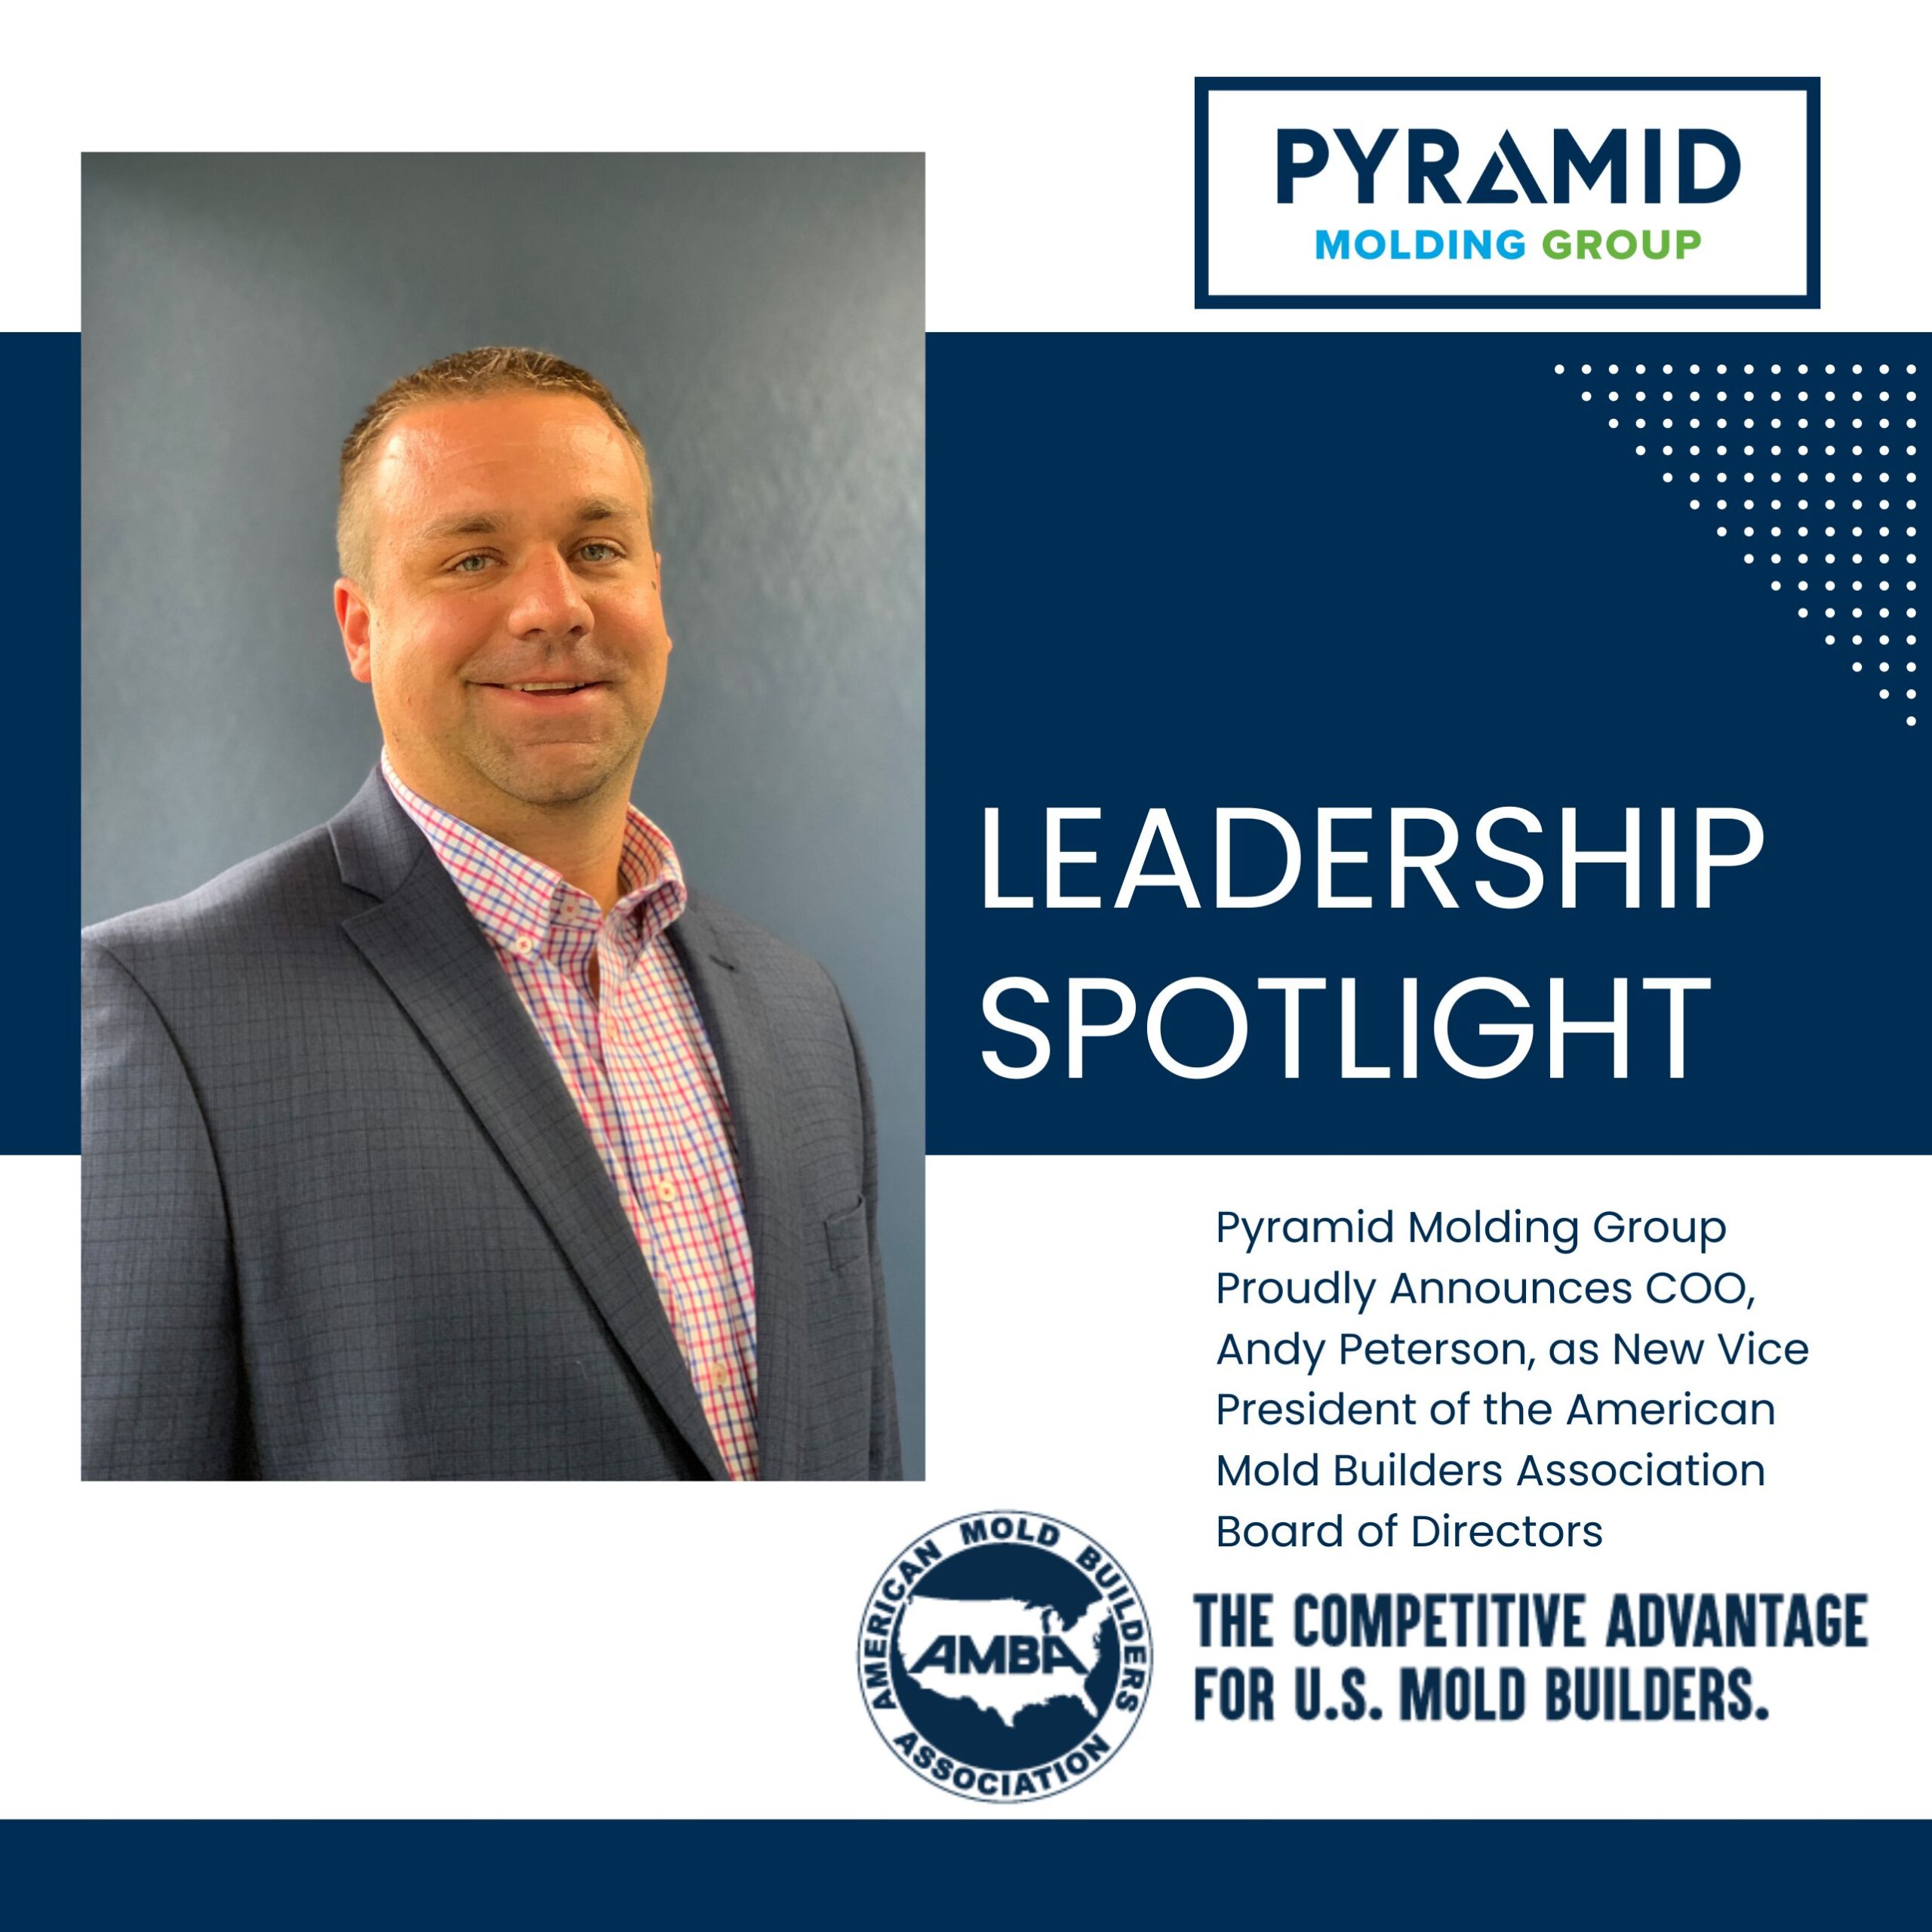 Featured image for “Pyramid Molding Group Proudly Announces COO, Andy Peterson, as New Vice President of the American Mold Builders Association Board of Directors”